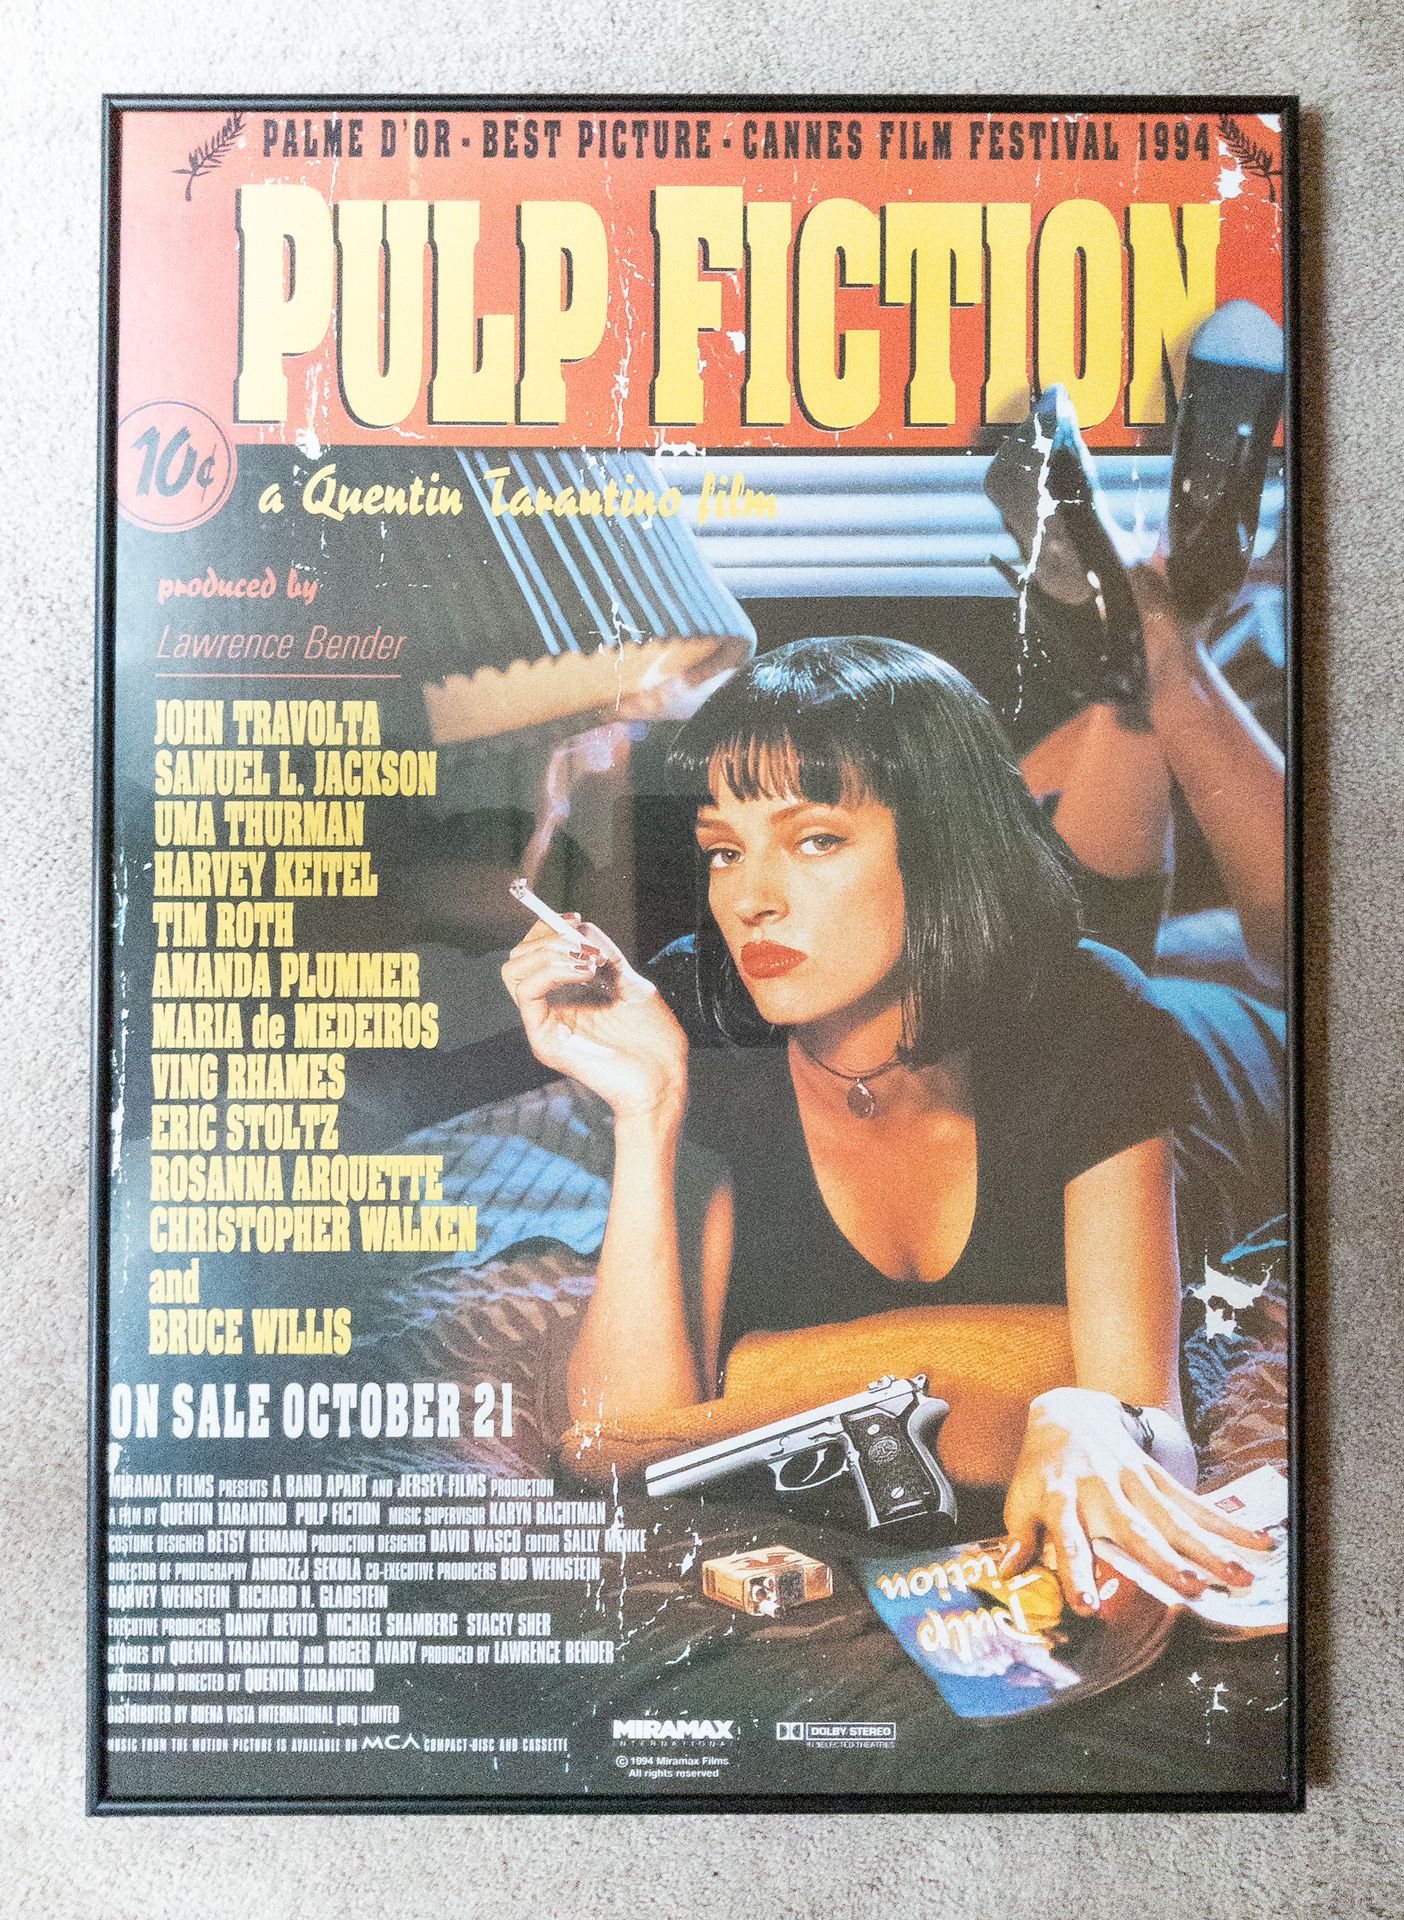 Pulp Fiction movie poster custom framed in metal frame with glass